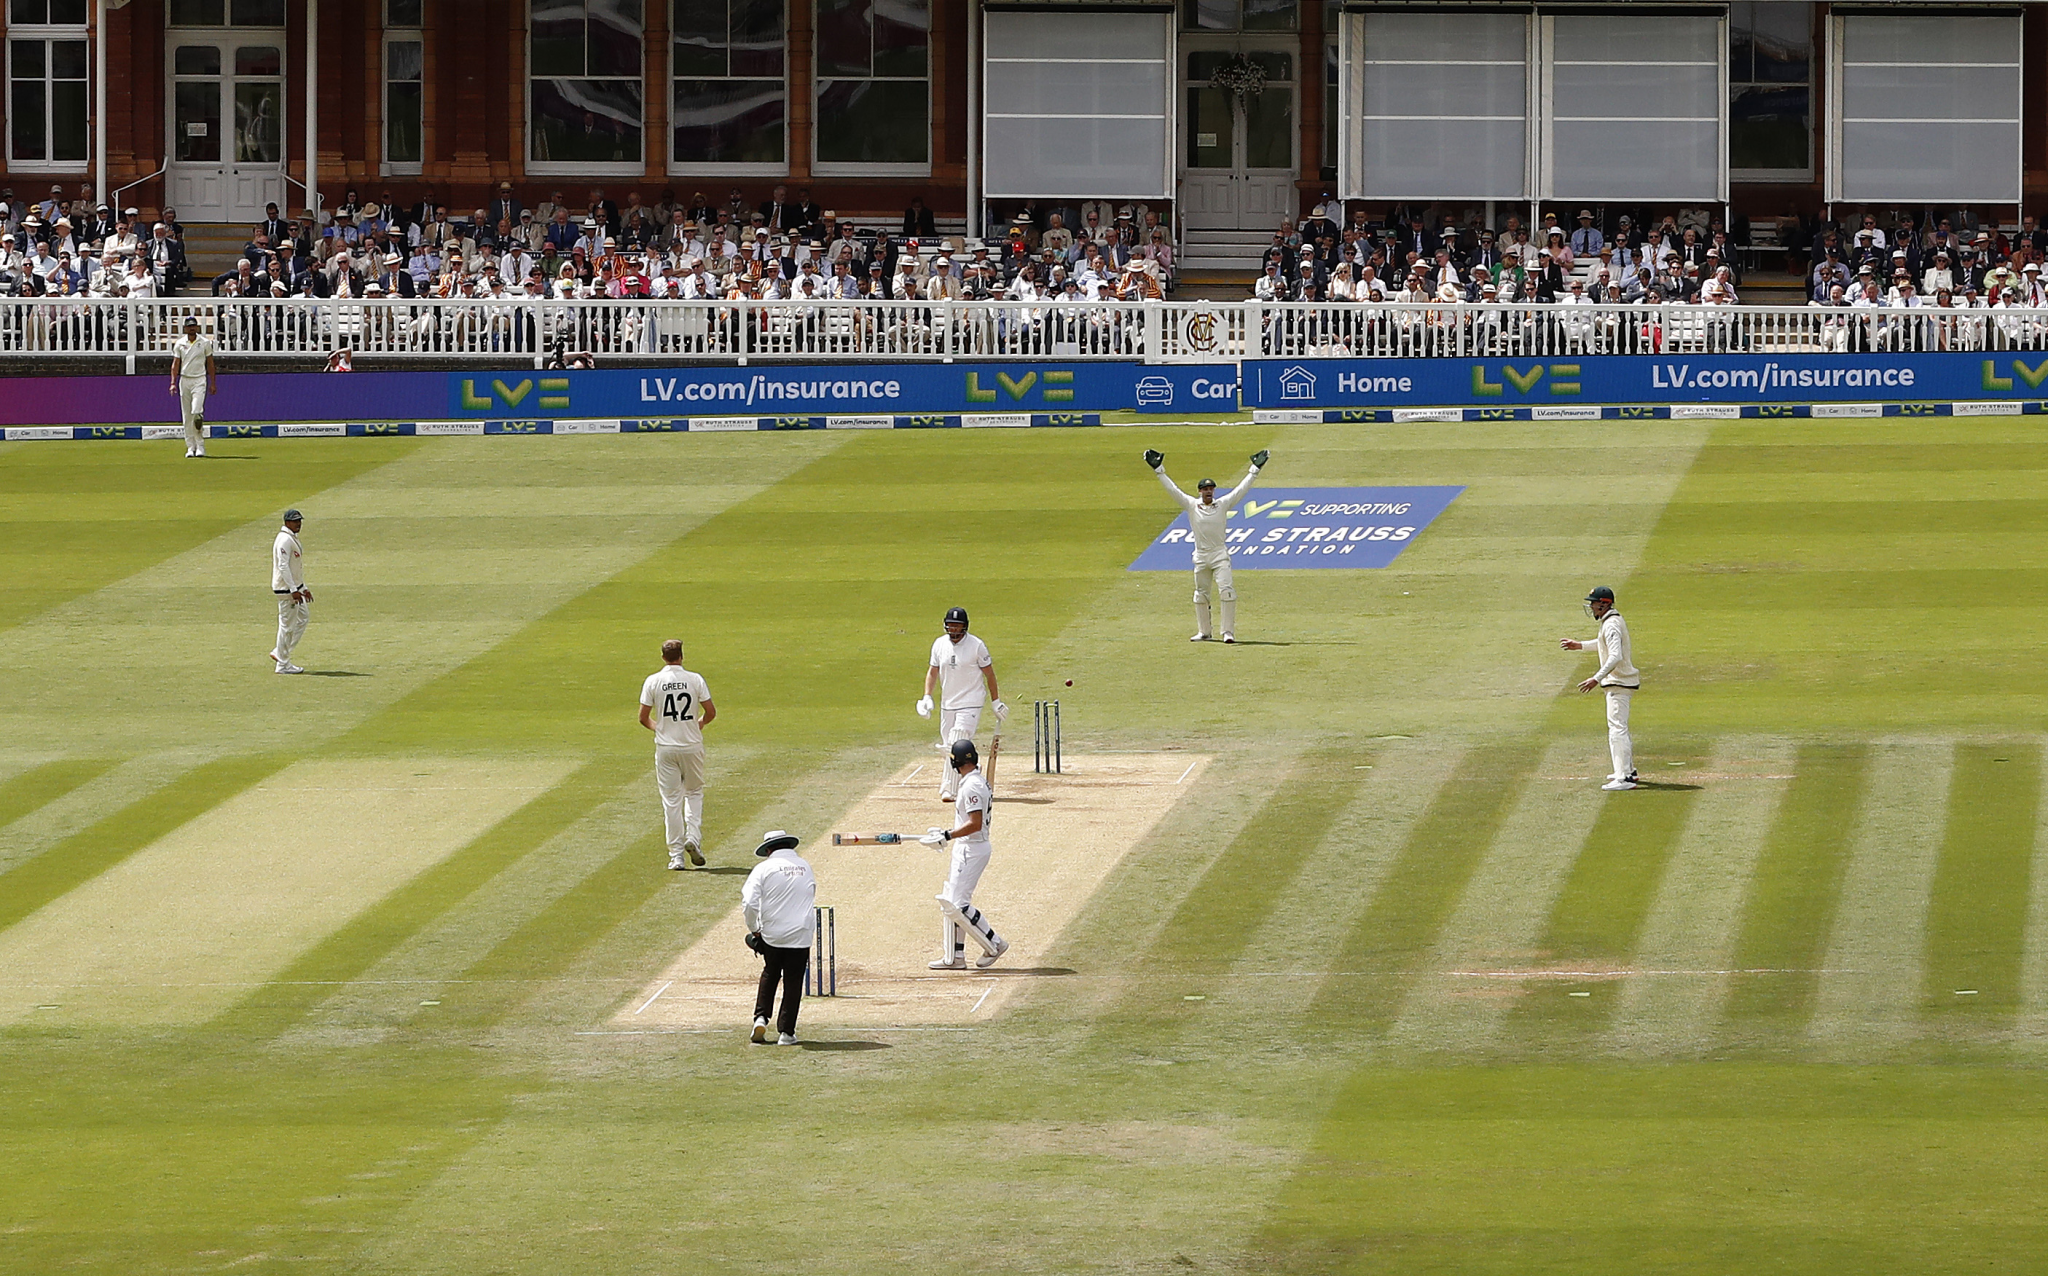 The controversial dismissal of England batsman Jonny Bairstow in the Second Test match aagainst Australia at Lord's has added even more spice to a rivalry that is well over a century old ©Getty Images